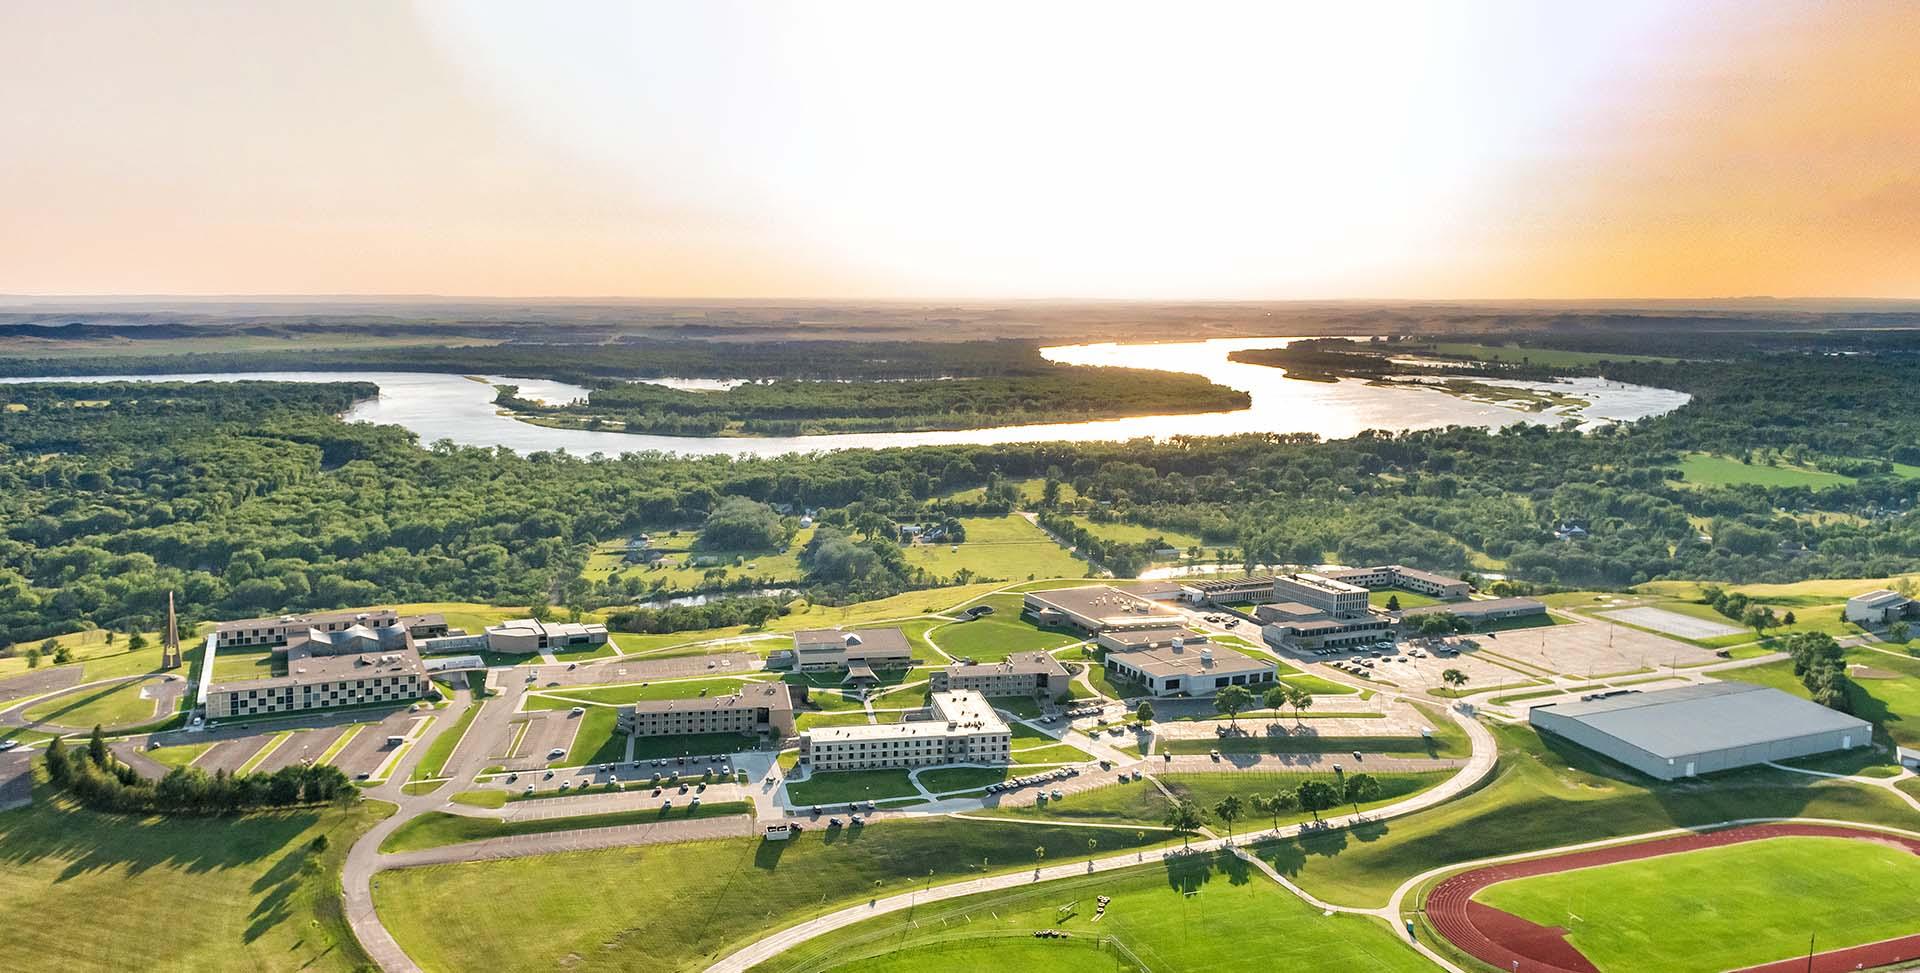 Aerial of the University of Mary campus at sunset with the Missouri River in the background